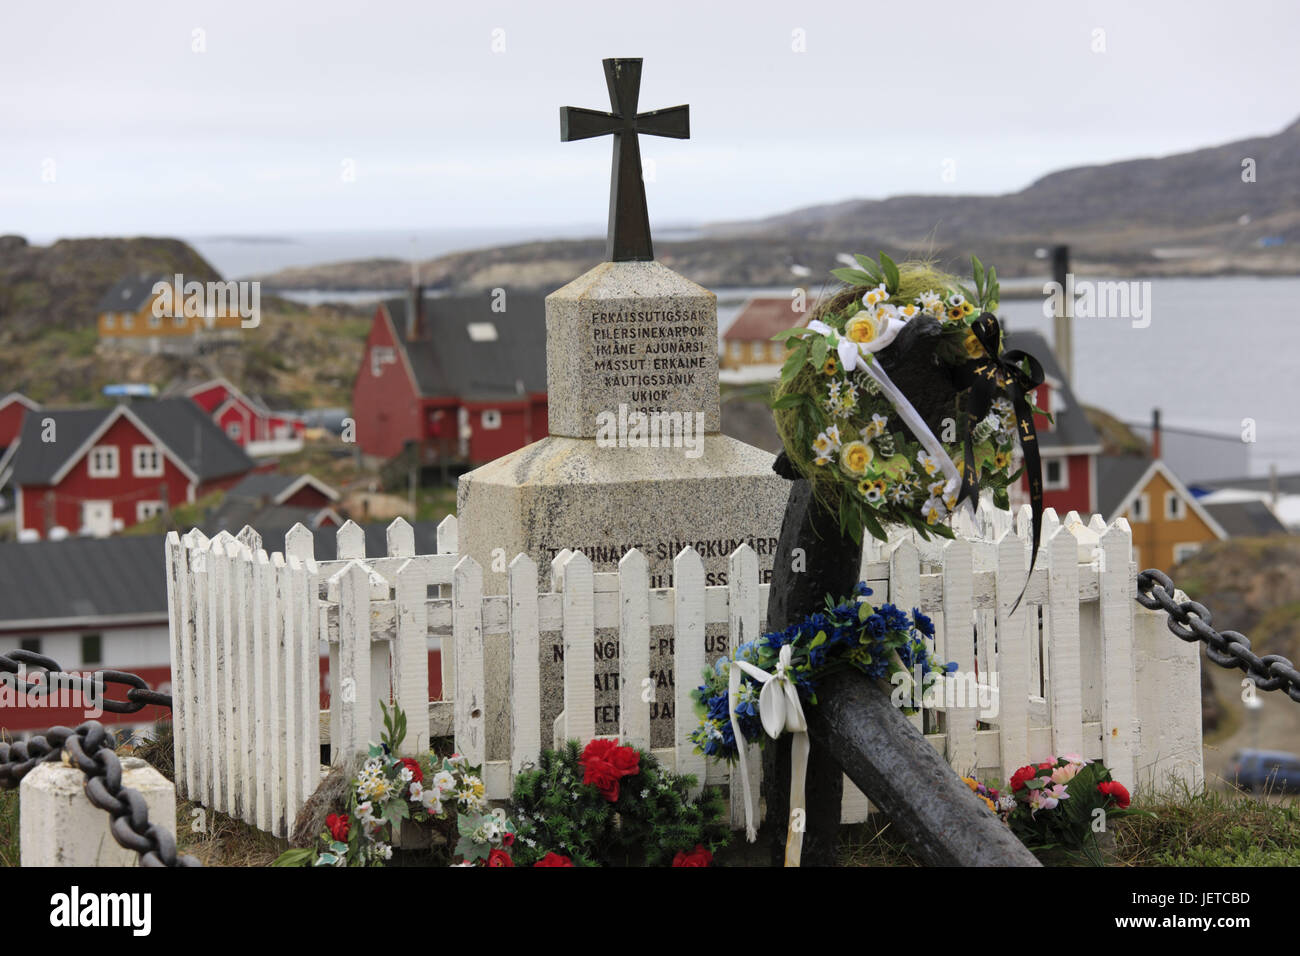 Greenland, Sisimiut, hill, monument, anchor, floral decoration, detail, Western Greenland, town, destination, place of interest, culture, outside, Inuit, Inuit culture, building, timber houses, lookout, cross, tomb, monument, floral wreaths, deserted, Stock Photo